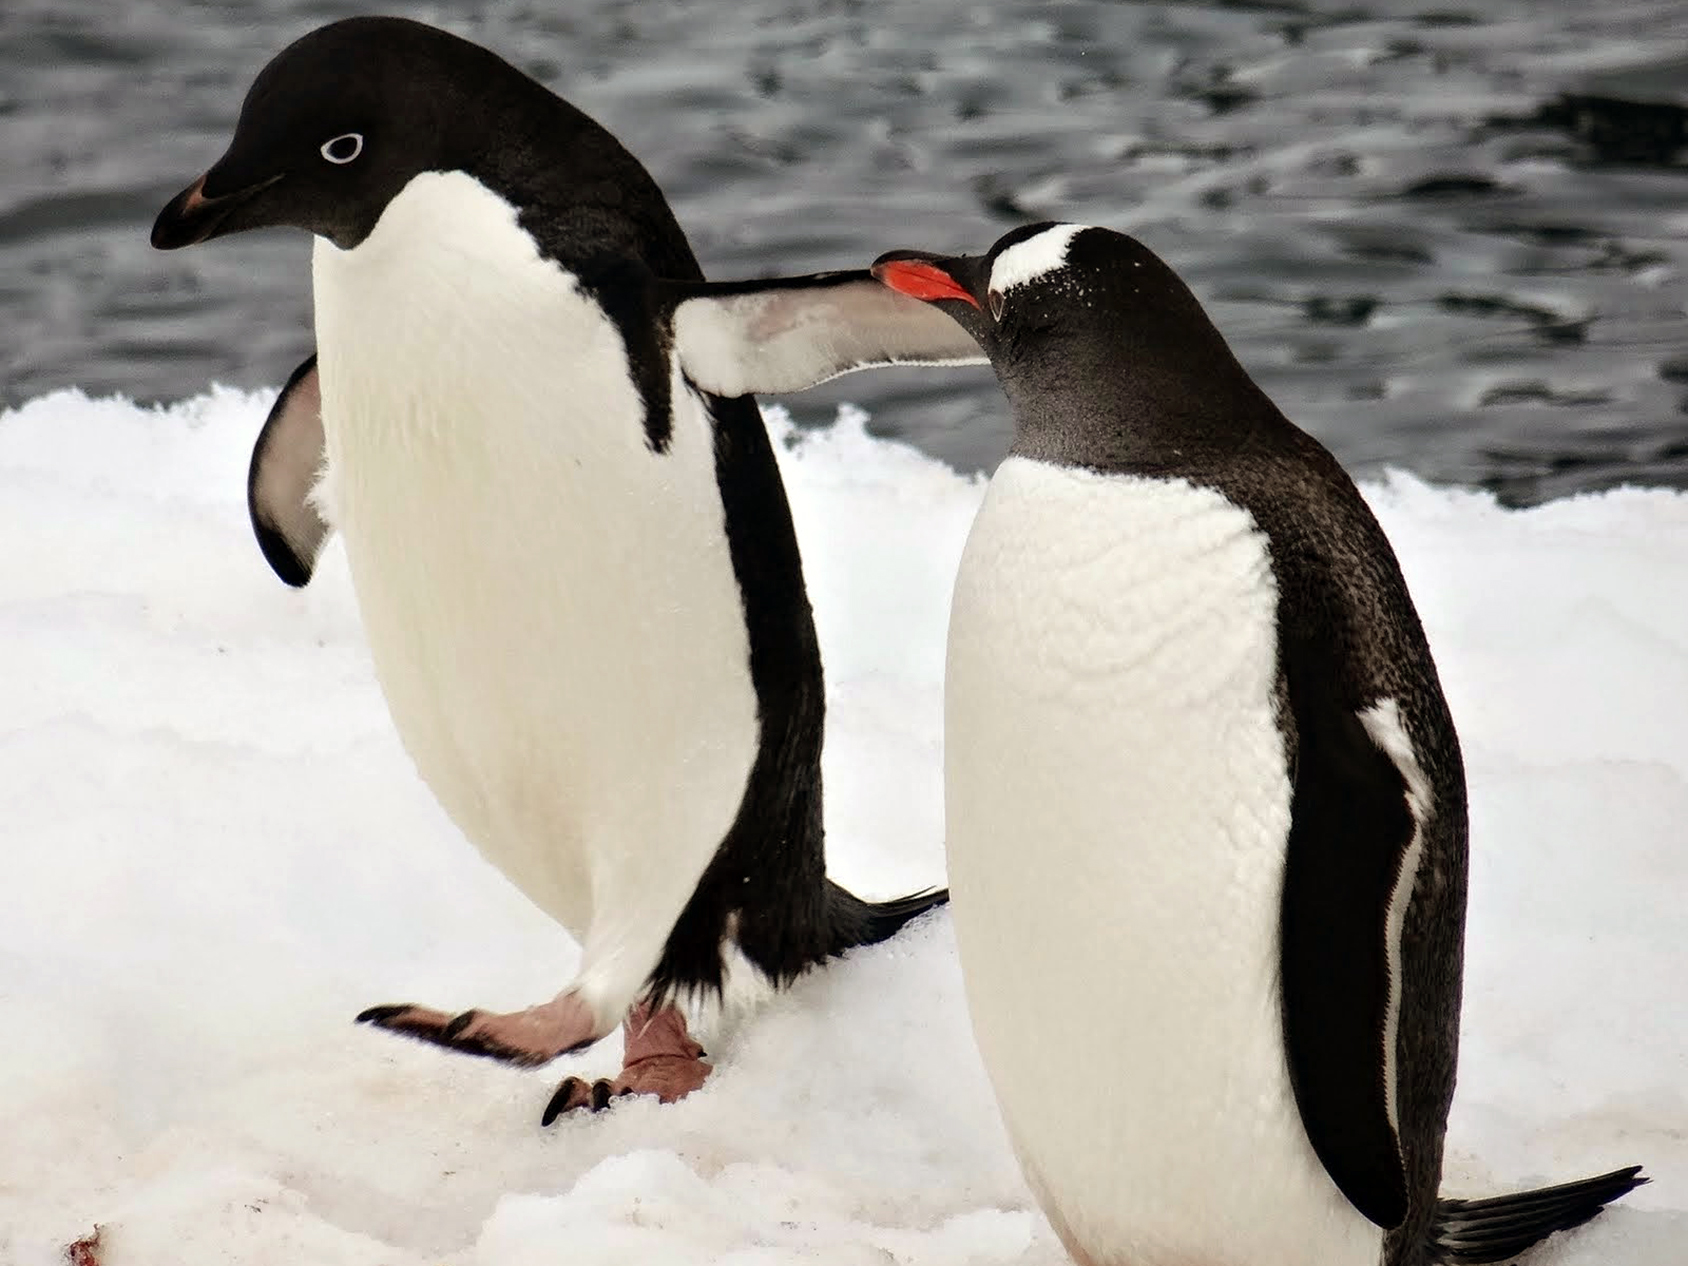 True to the species’ social nature, we spotted this Adélie penguin chatting up a friendly gentoo penguin at the northern entrance of the Lemaire Channel.